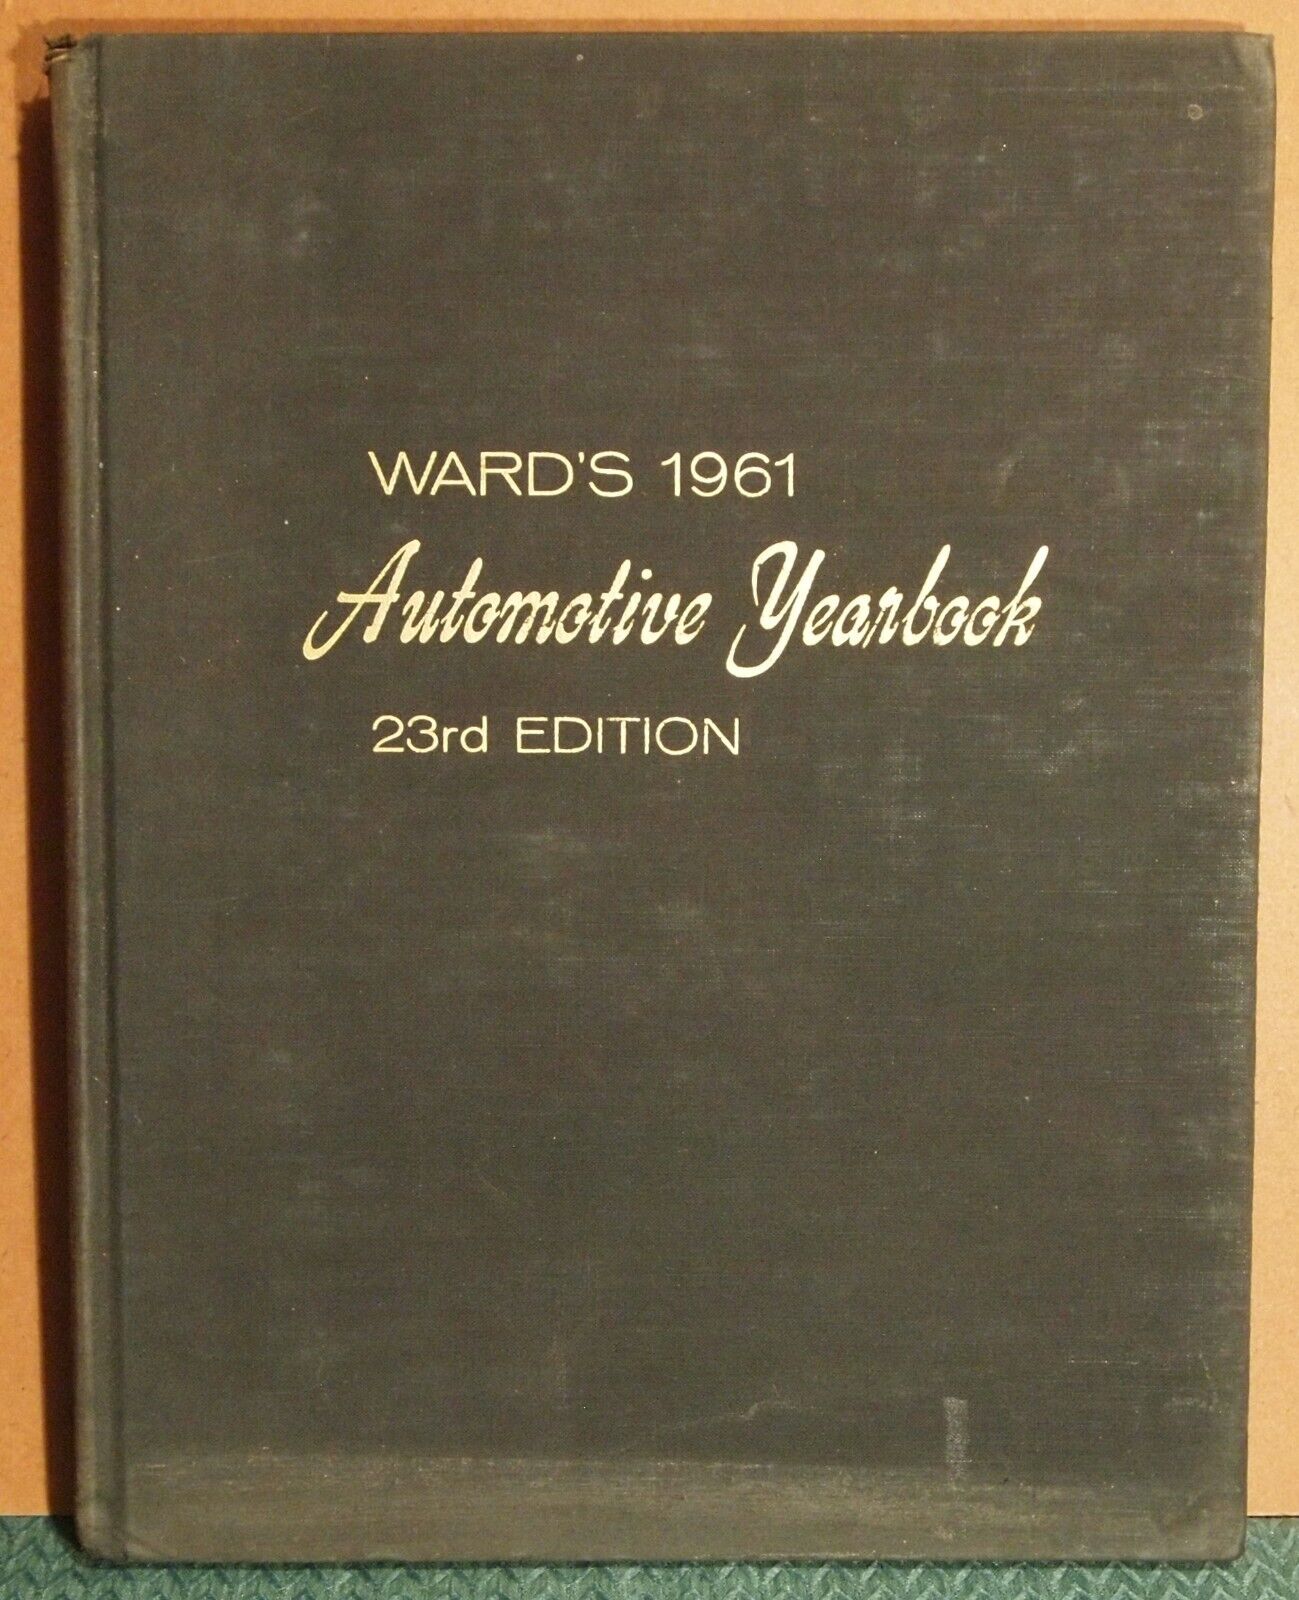 1961 WARD\'S AUTOMOTIVE YEARBOOK 23rd edition WARDS-20